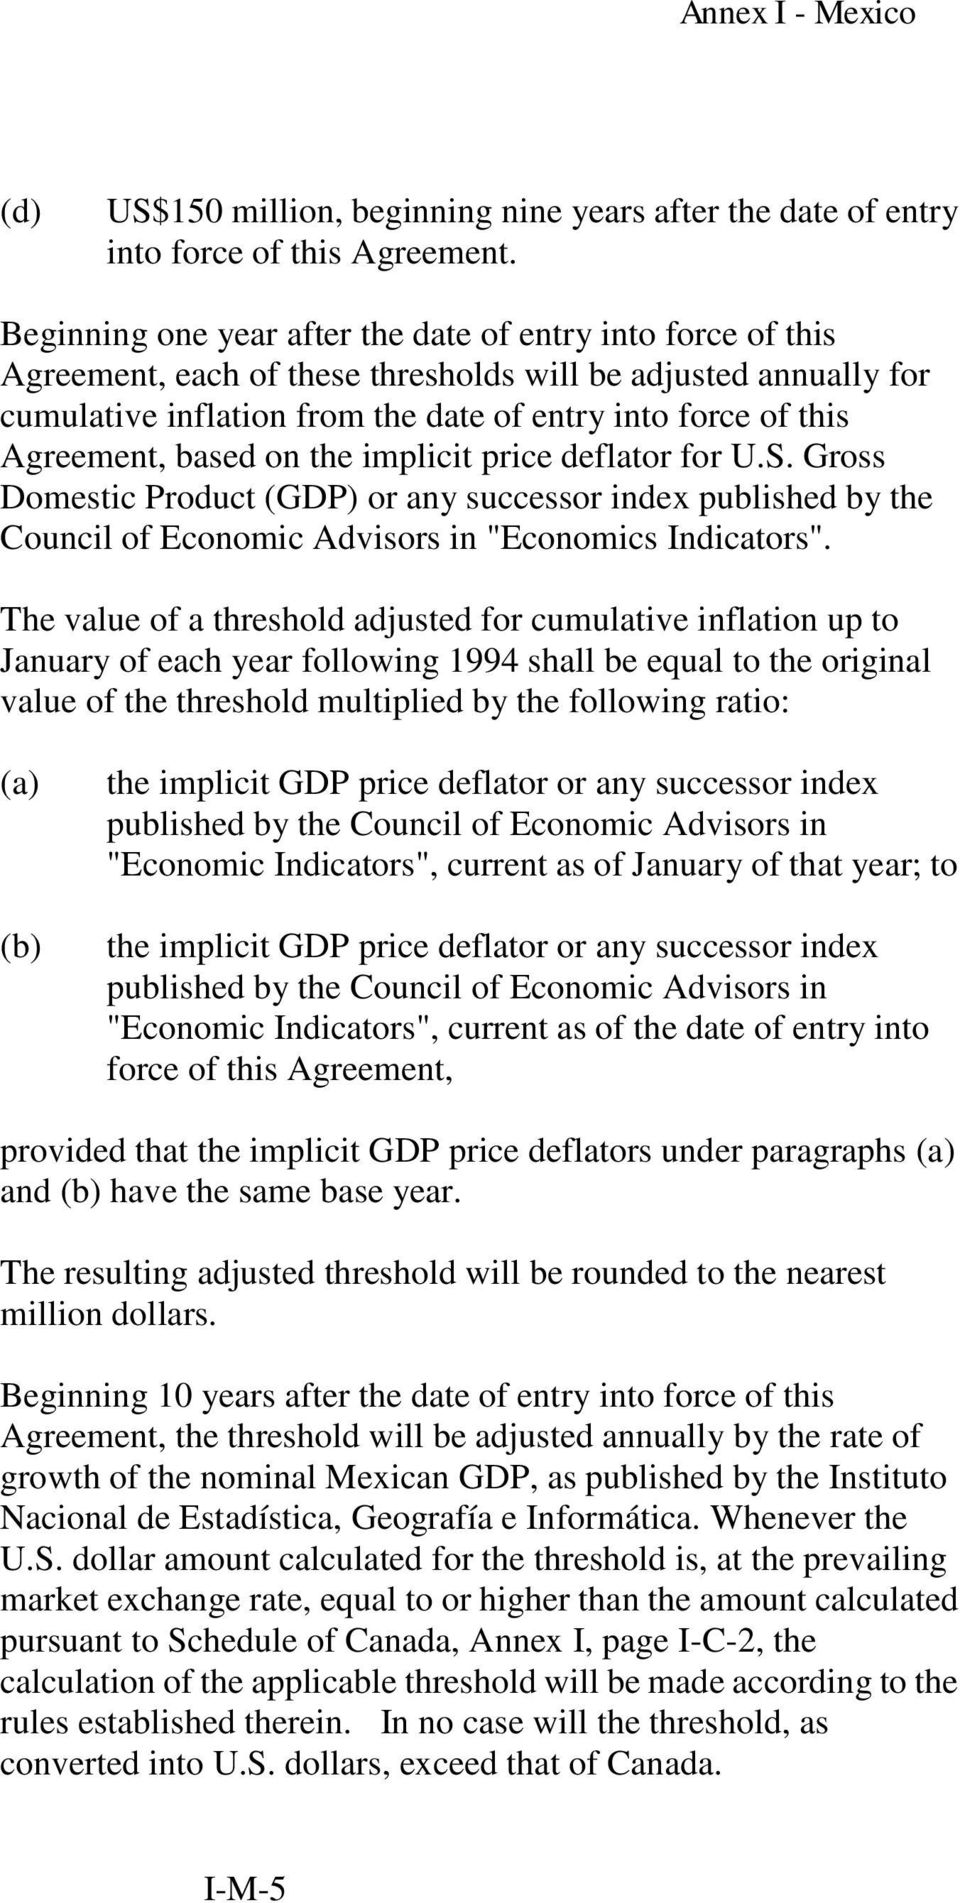 Agreement, based on the implicit price deflator for U.S. Gross Domestic Product (GDP) or any successor index published by the Council of Economic Advisors in "Economics Indicators".